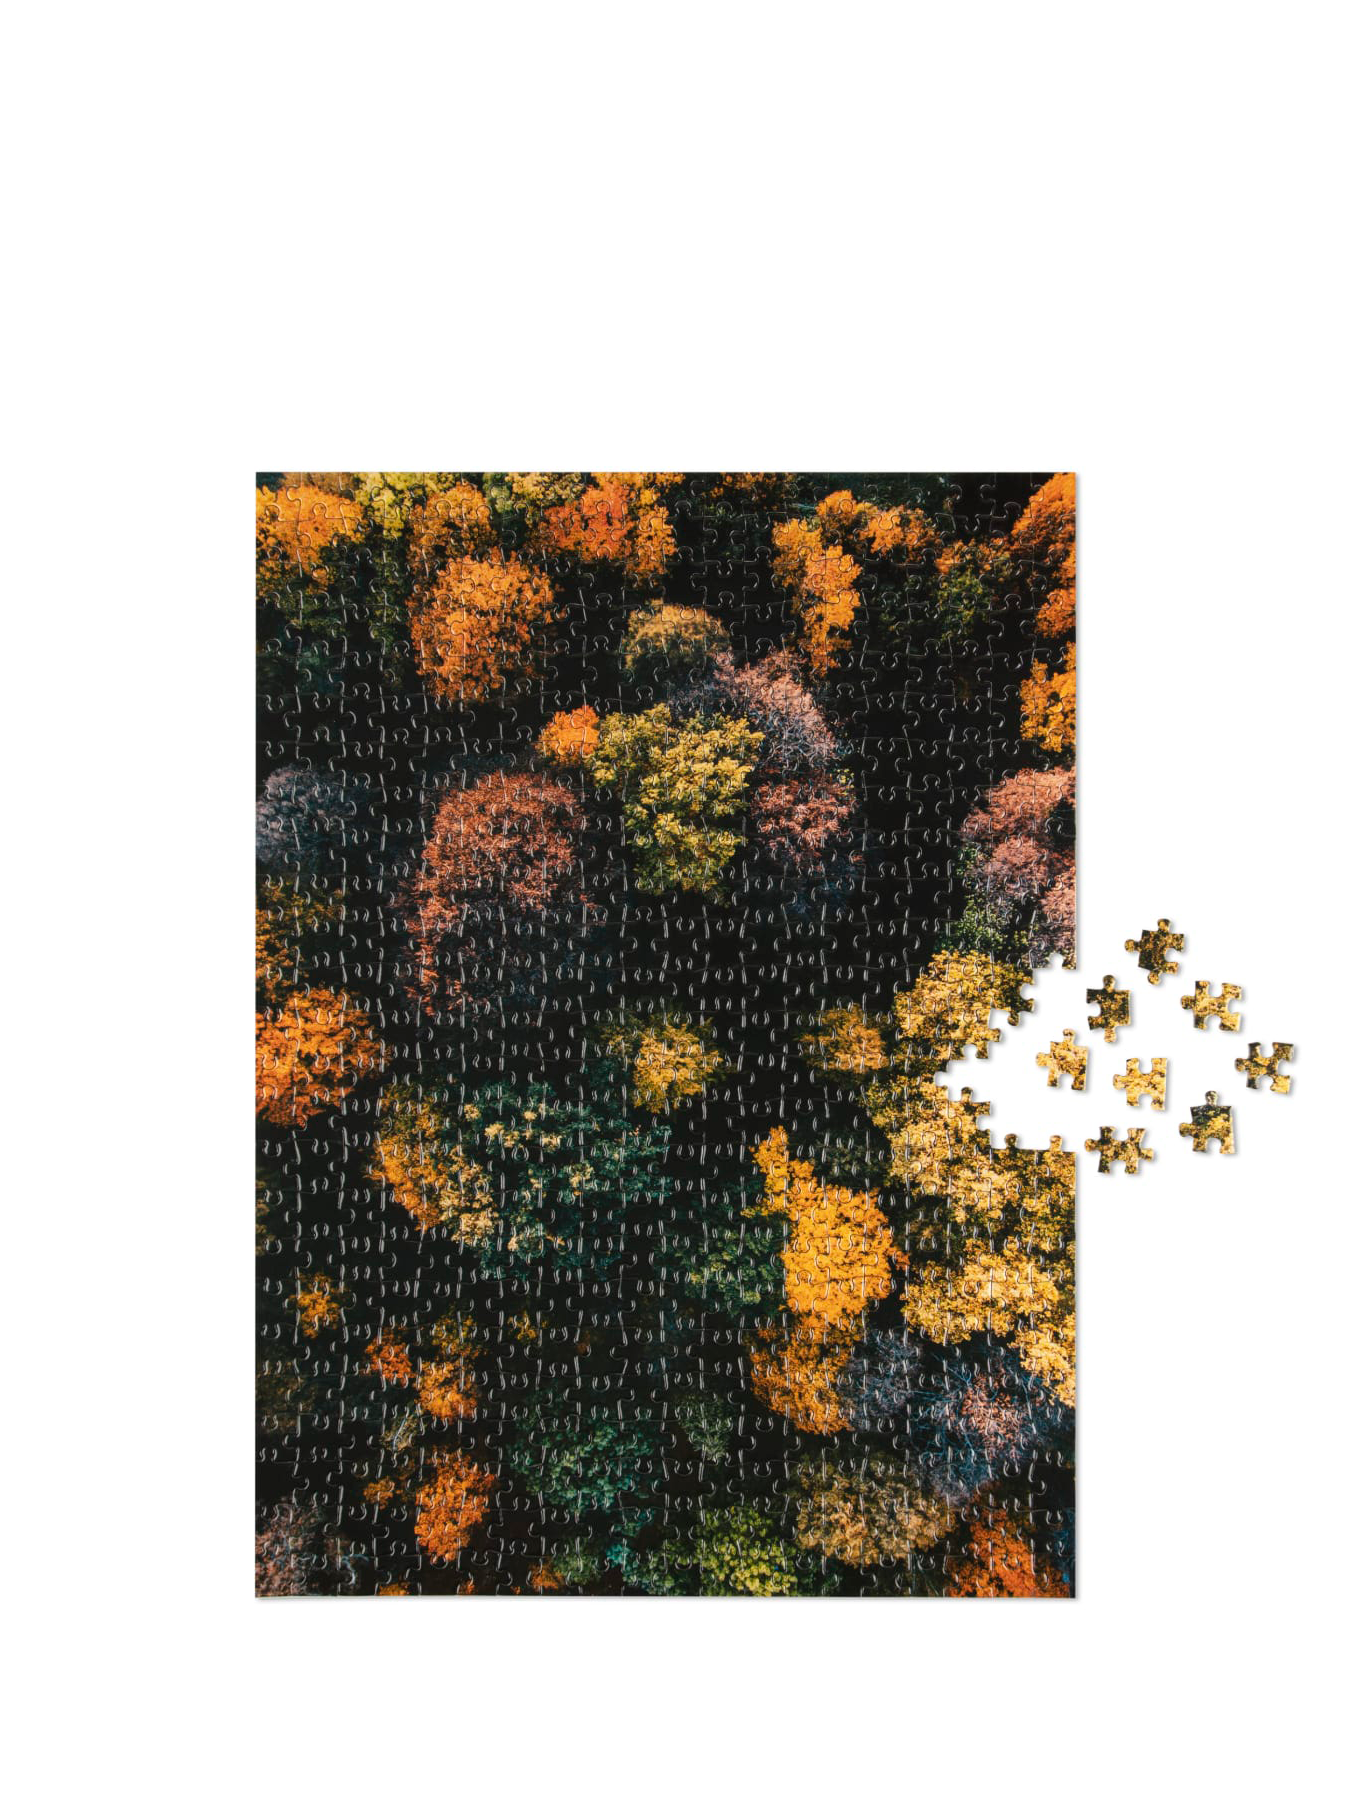 The puzzle makes an enchanting picture of a airview forest with tree leaves beginning to change to fall colours. 500 puzzle pieces is not that big and you might think it's easy, but with plenty of dark pieces and subtle hues it can be a bit more challenging!